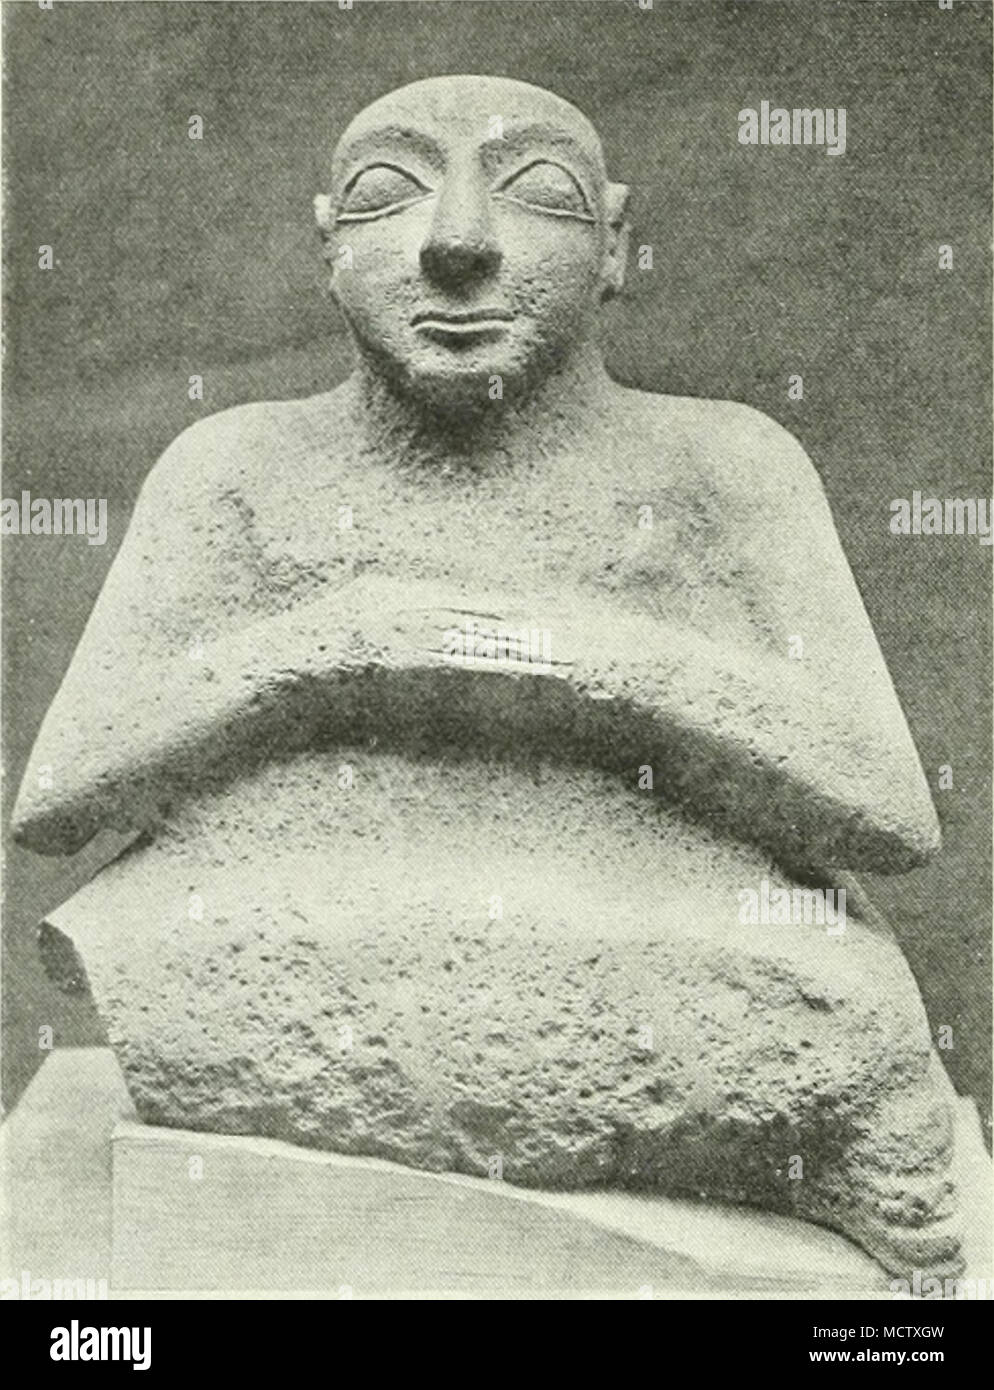 . Fig. 3.—SMAr,!, STATUE OF KUR-I.II,, DOORKEFPER OF THE TEMPI,E OF ERECH; ABOUT 3000 B.C. Found at el-'Obeid, 1019. By co'.irlesy of the Brili-ih Mlise:im. Mr. Sidney Smith of a brick with the temple-inscription of Ur-Nammu in the wall of the building. It is not yet decided, therefore, whether this building is a palace or a temple, though Mr. F. G. Newton, speaking as an architect, pronounces in favour of a temple and the authority of Ur-Nammu's bricks over Shulgi's ! Unluckily a foundation-deposit excavated in 1923 yielded us no decisive evidence on the point, as the tablet accompanying it,  Stock Photo